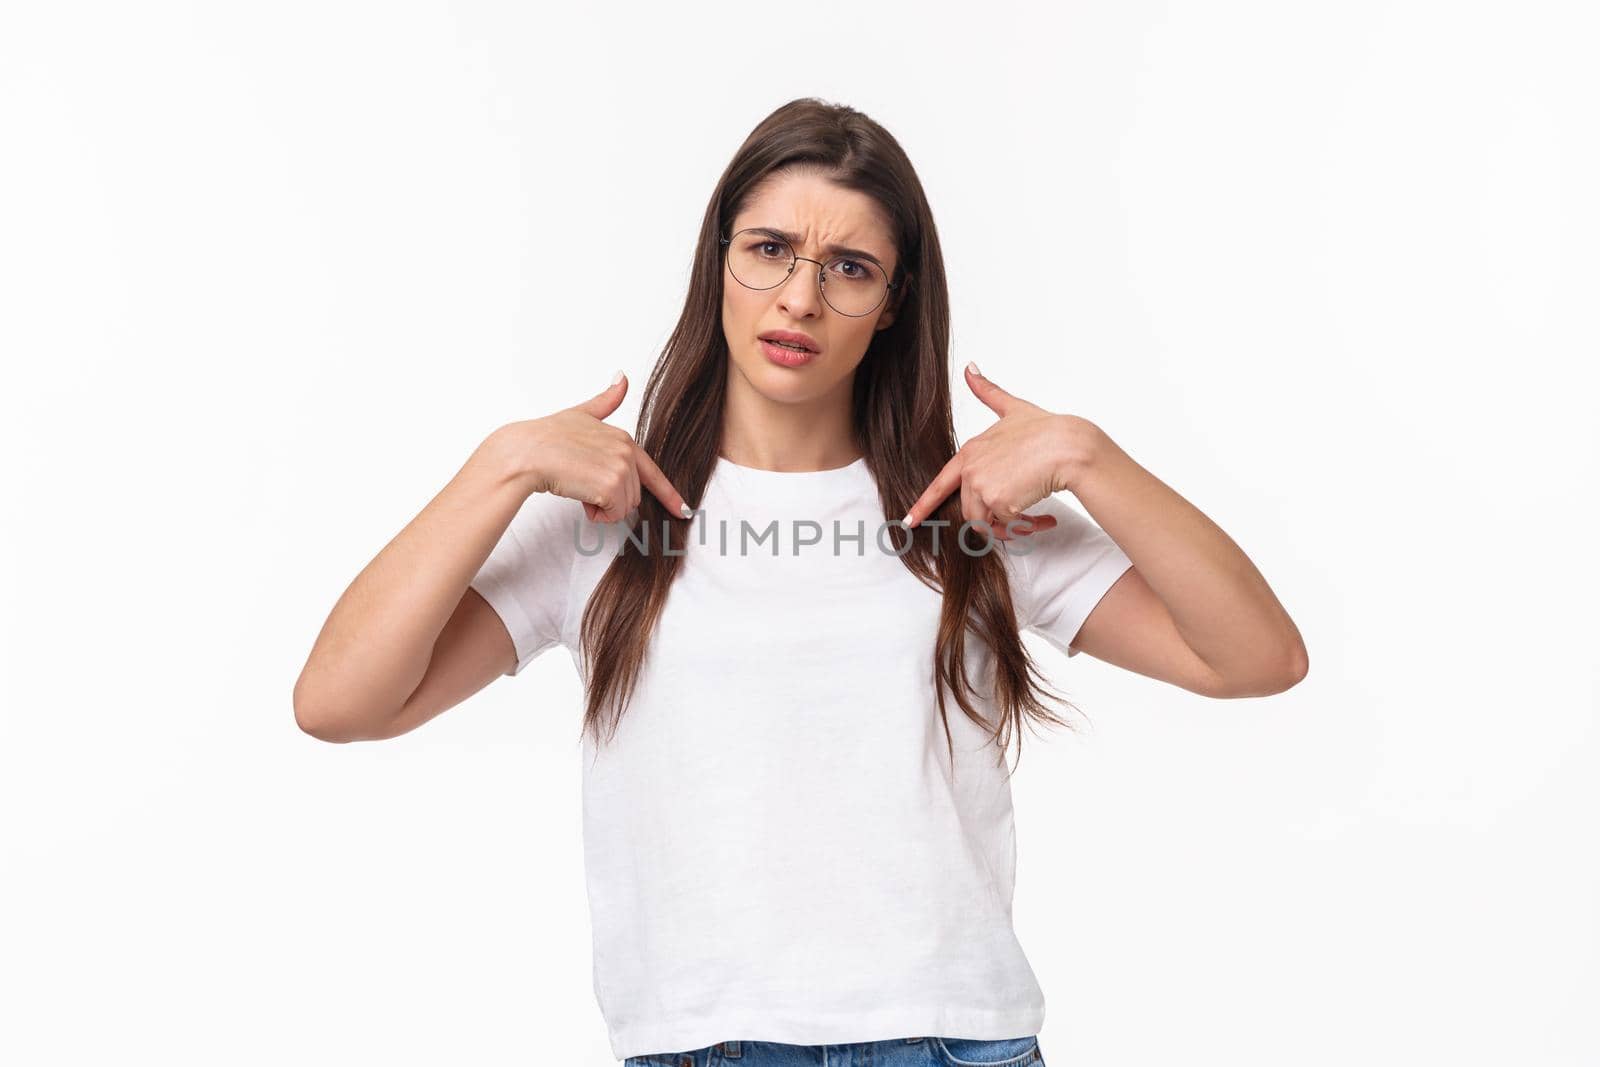 Waist-up portrait of insulted, shocked and offended young frustrated woman pointing at herself, grimace puzzled and confused, cant understand why she was picked or accused.